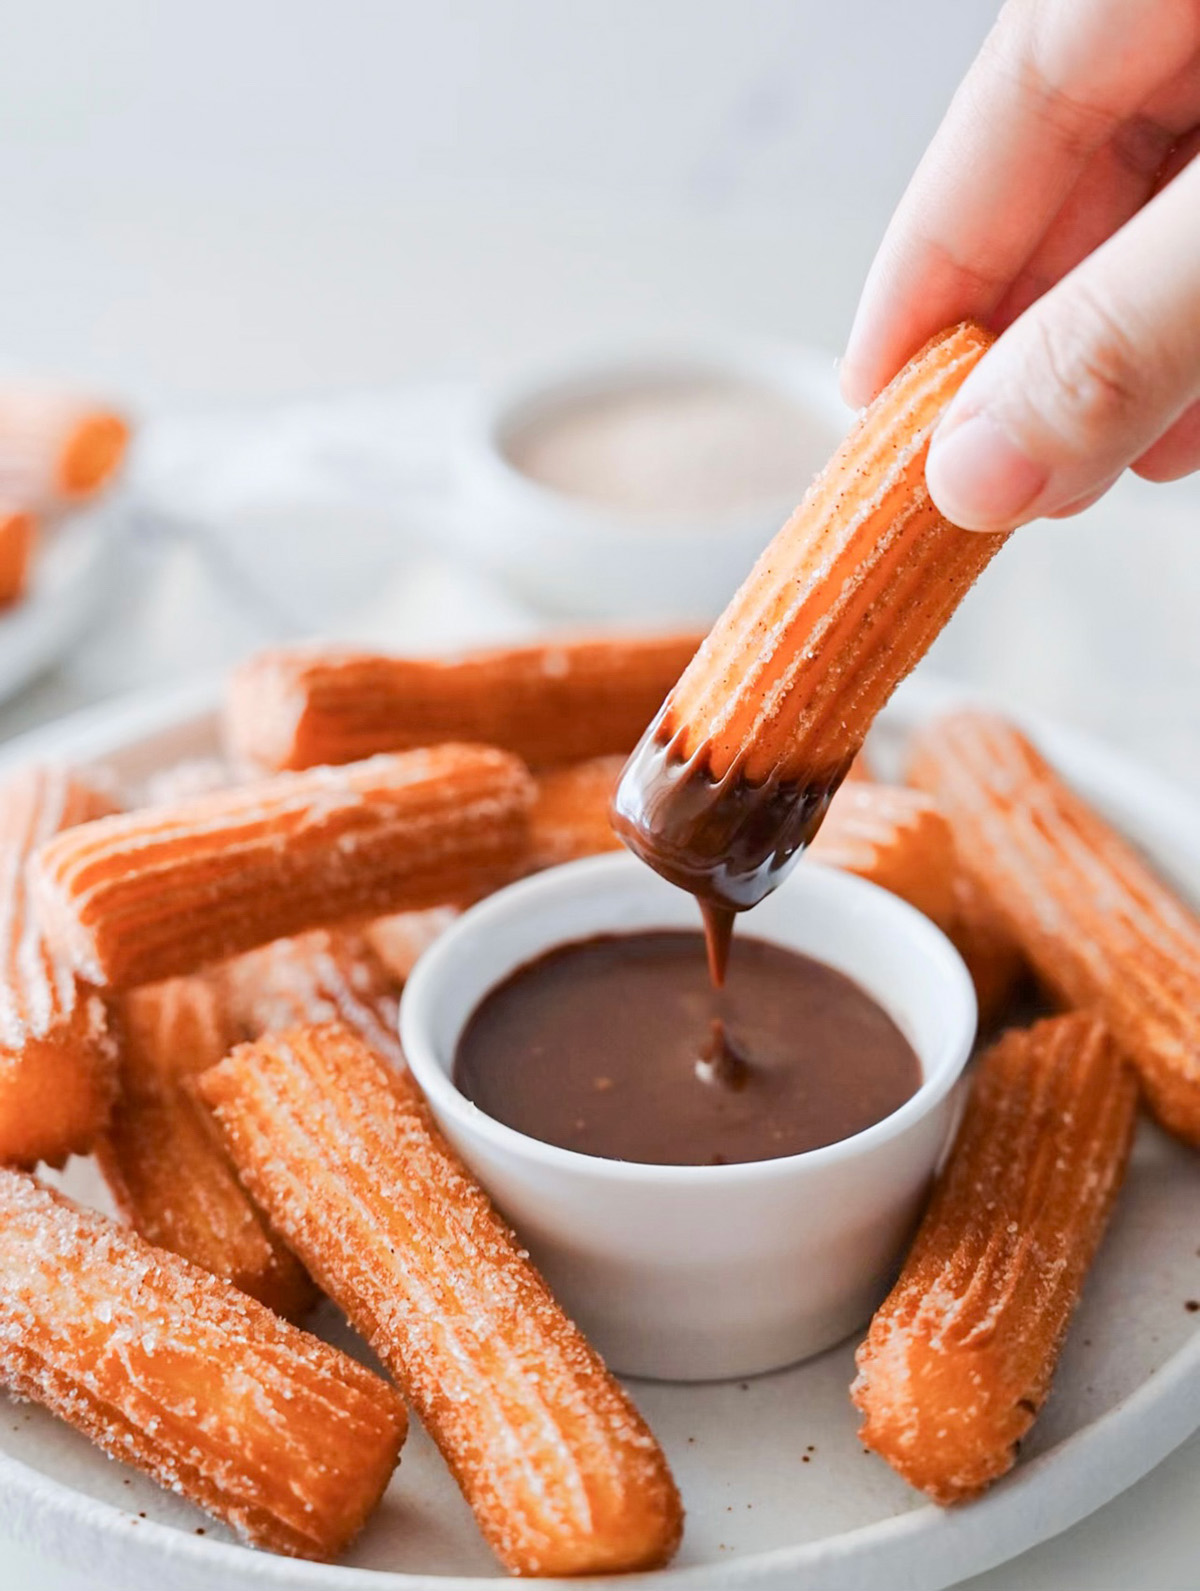 Air Fryer Churros With Chocolate Sauce- Satisfy Your Cravings The Modern Way